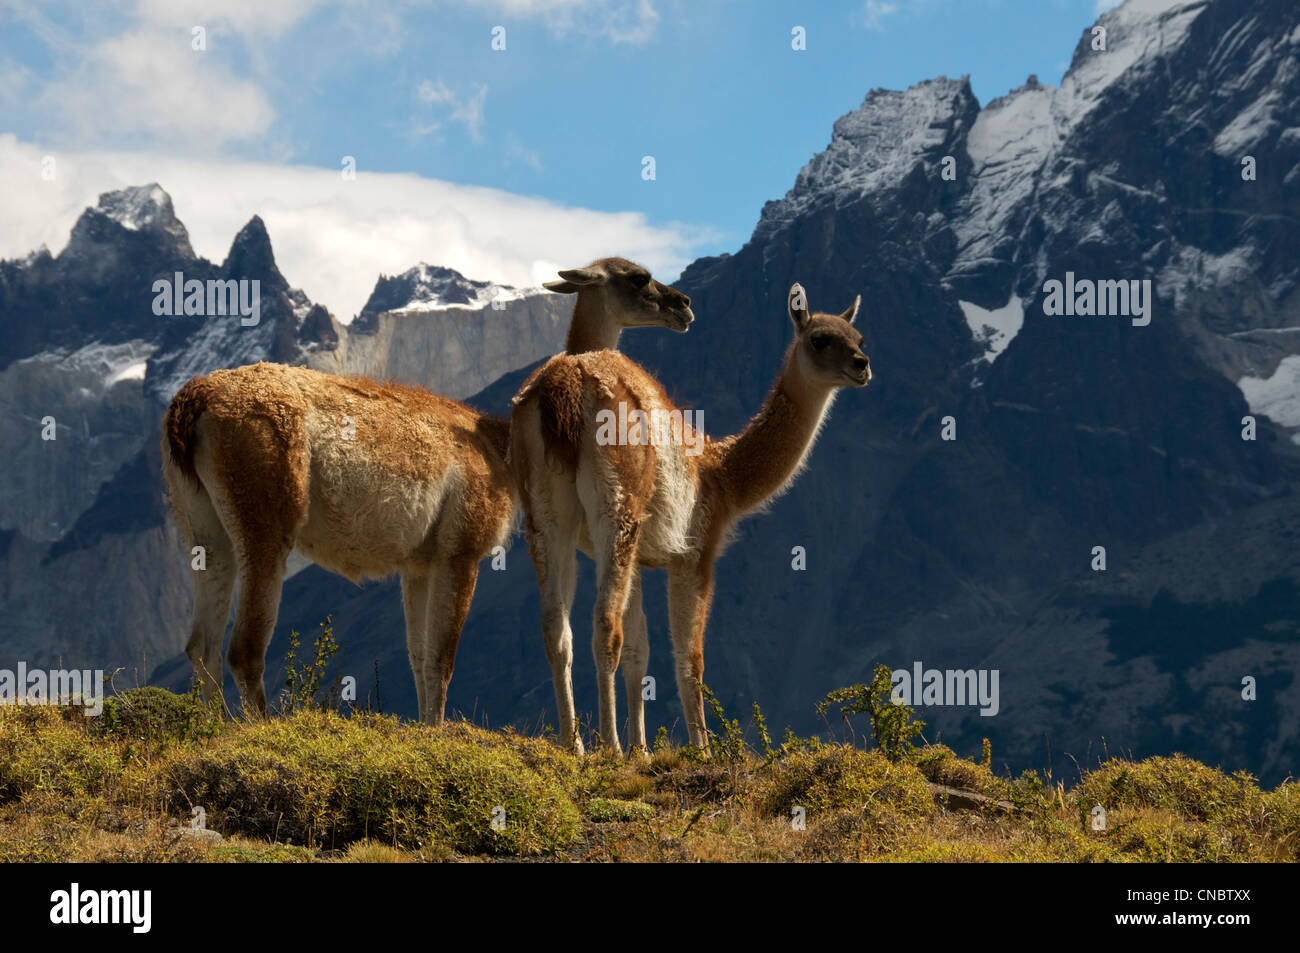 Two Guanaco Torres del Paine National Park Patagonia Chile Stock Photo